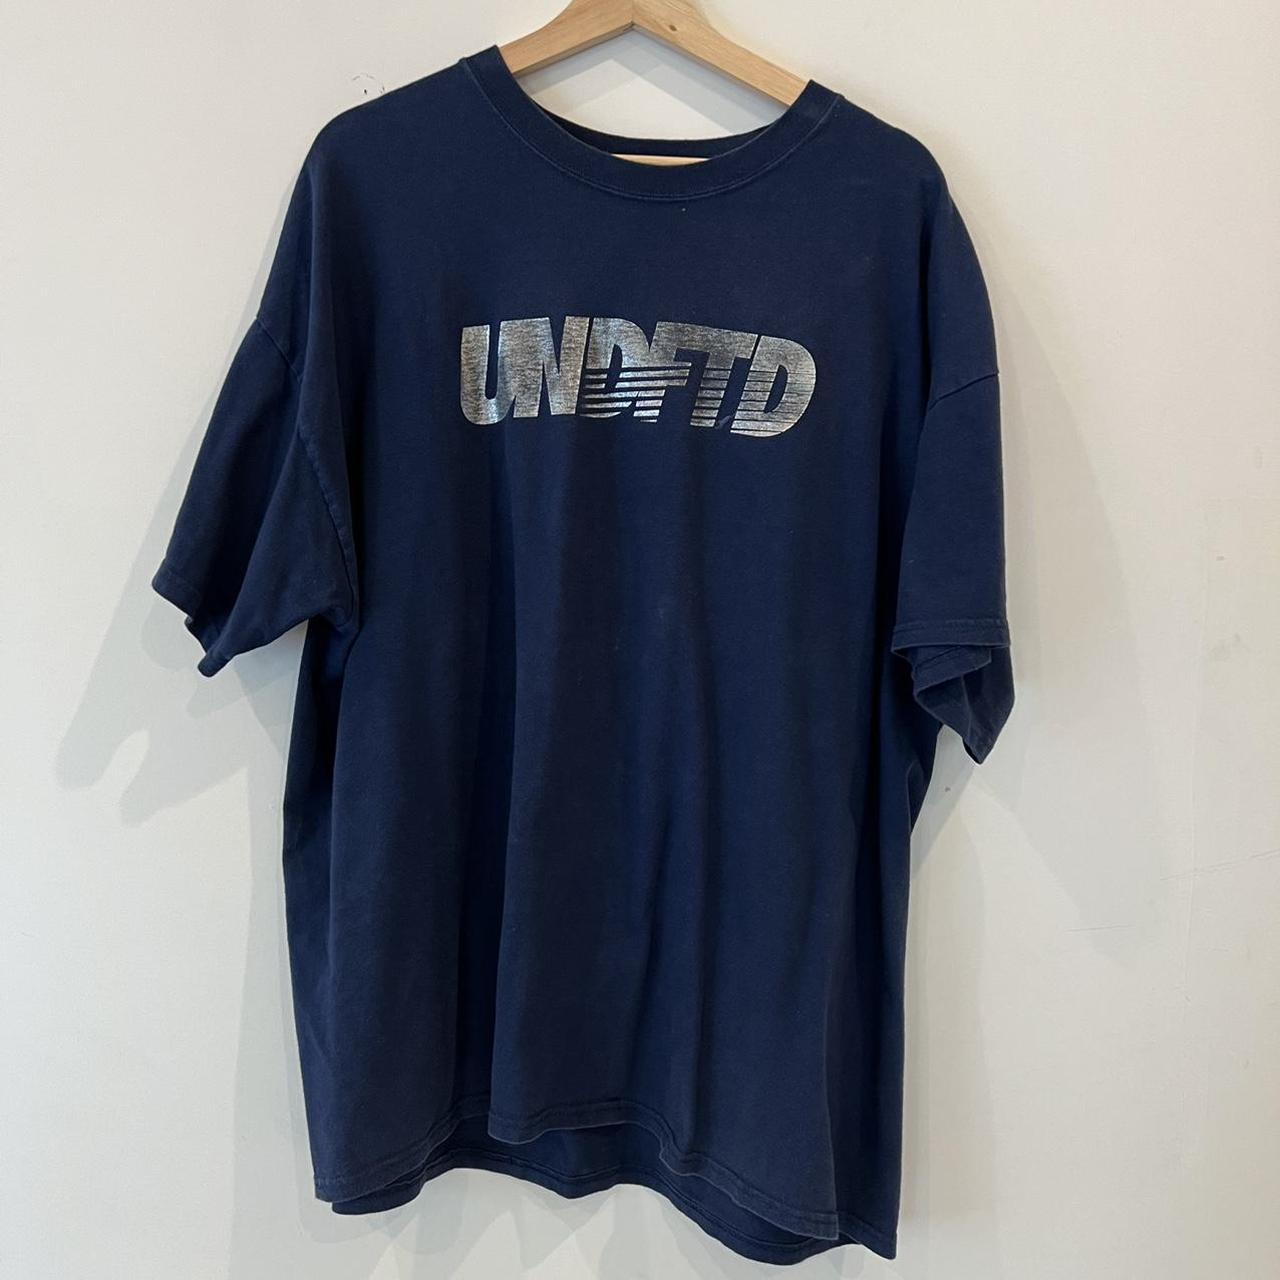 Undefeated Men's Navy and Silver T-shirt